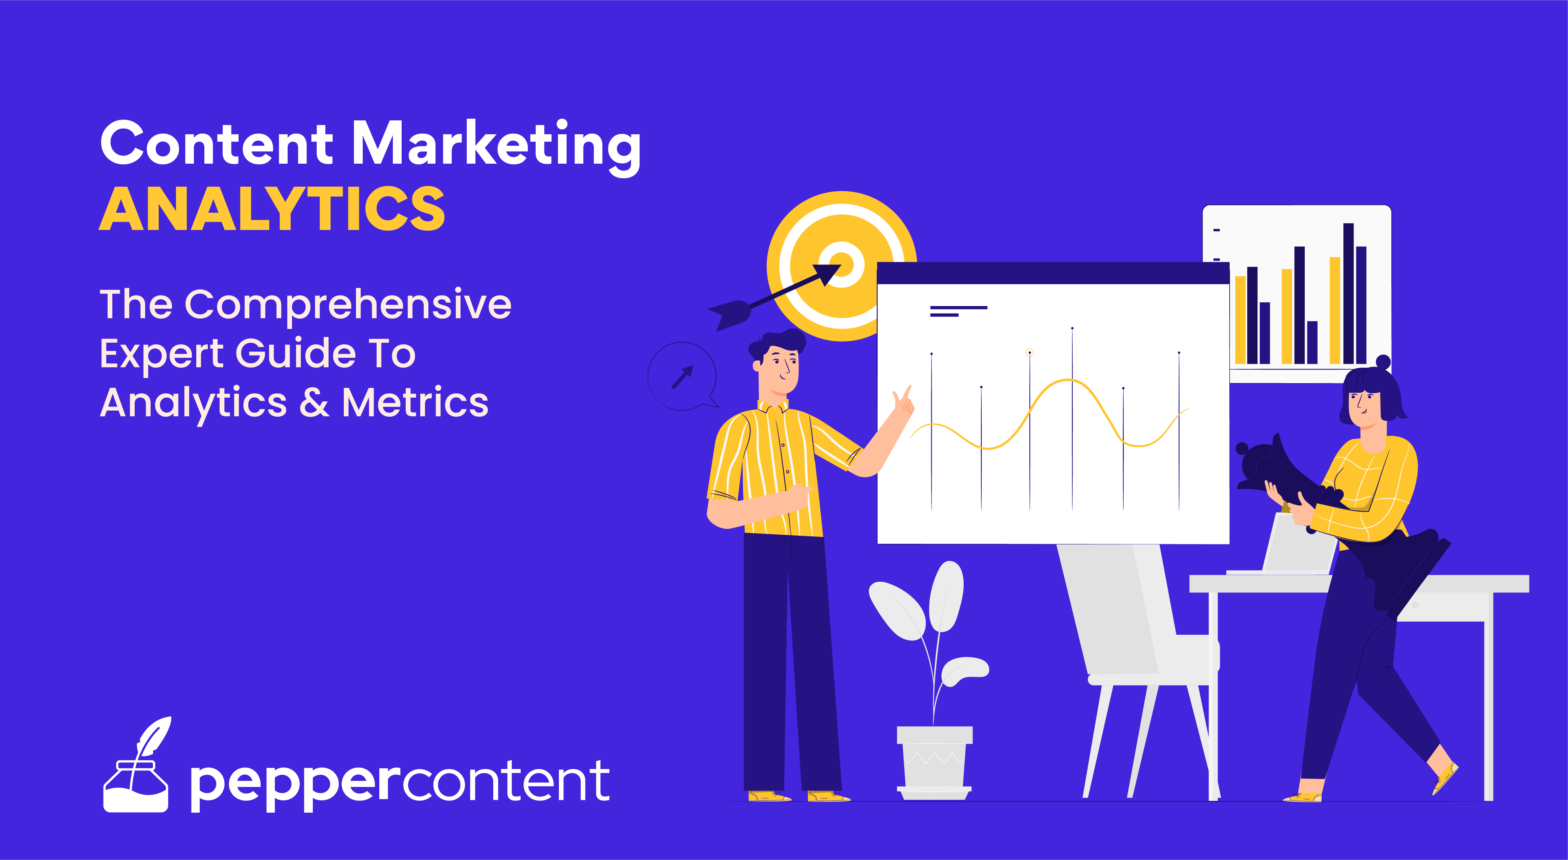 Your Expert Guide to Content Marketing Analytics